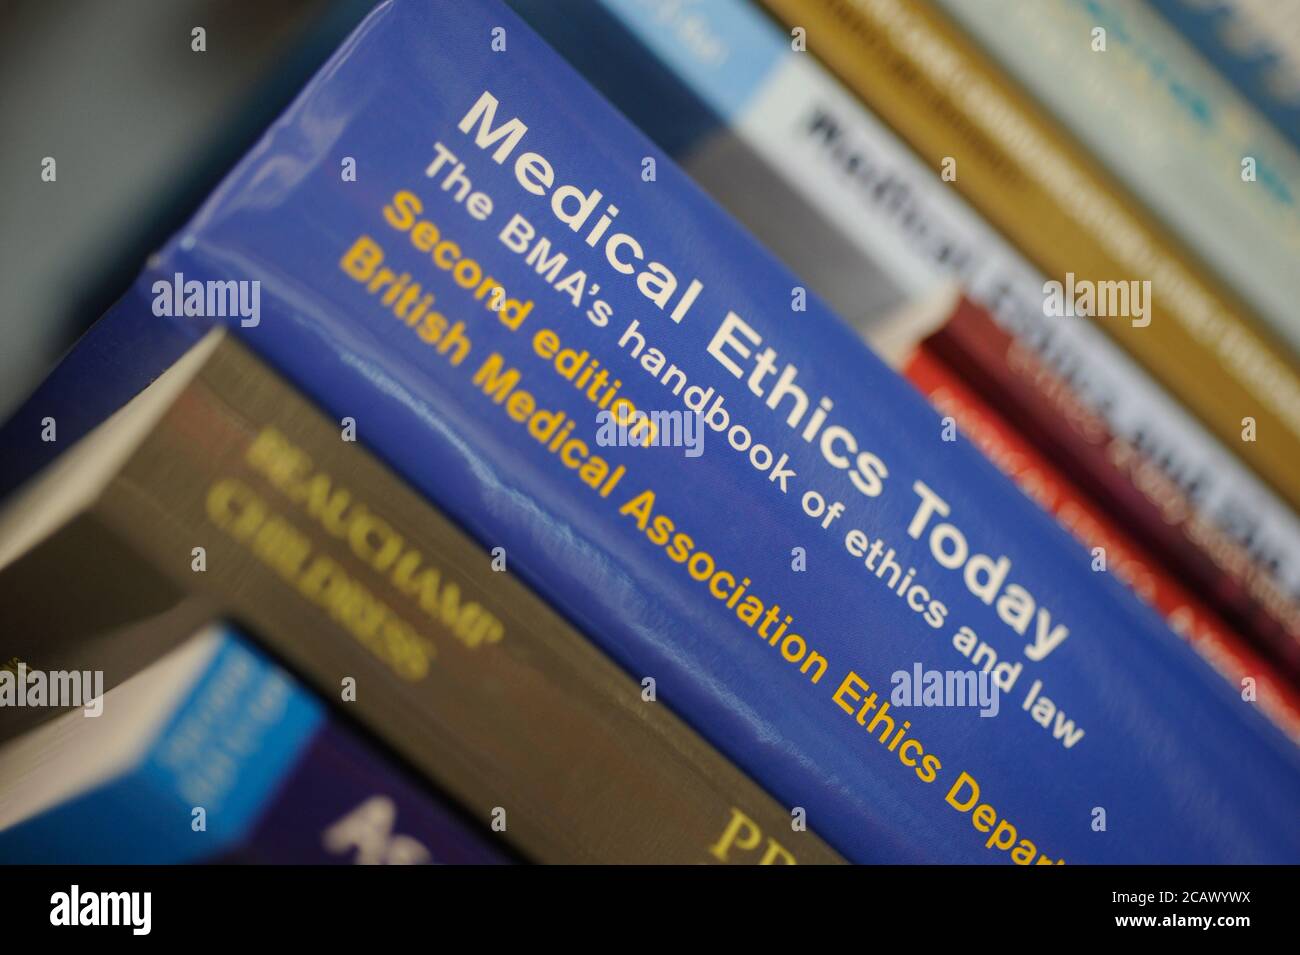 Medical Ethics Today handbook on a book shelf in a library. Stock Photo